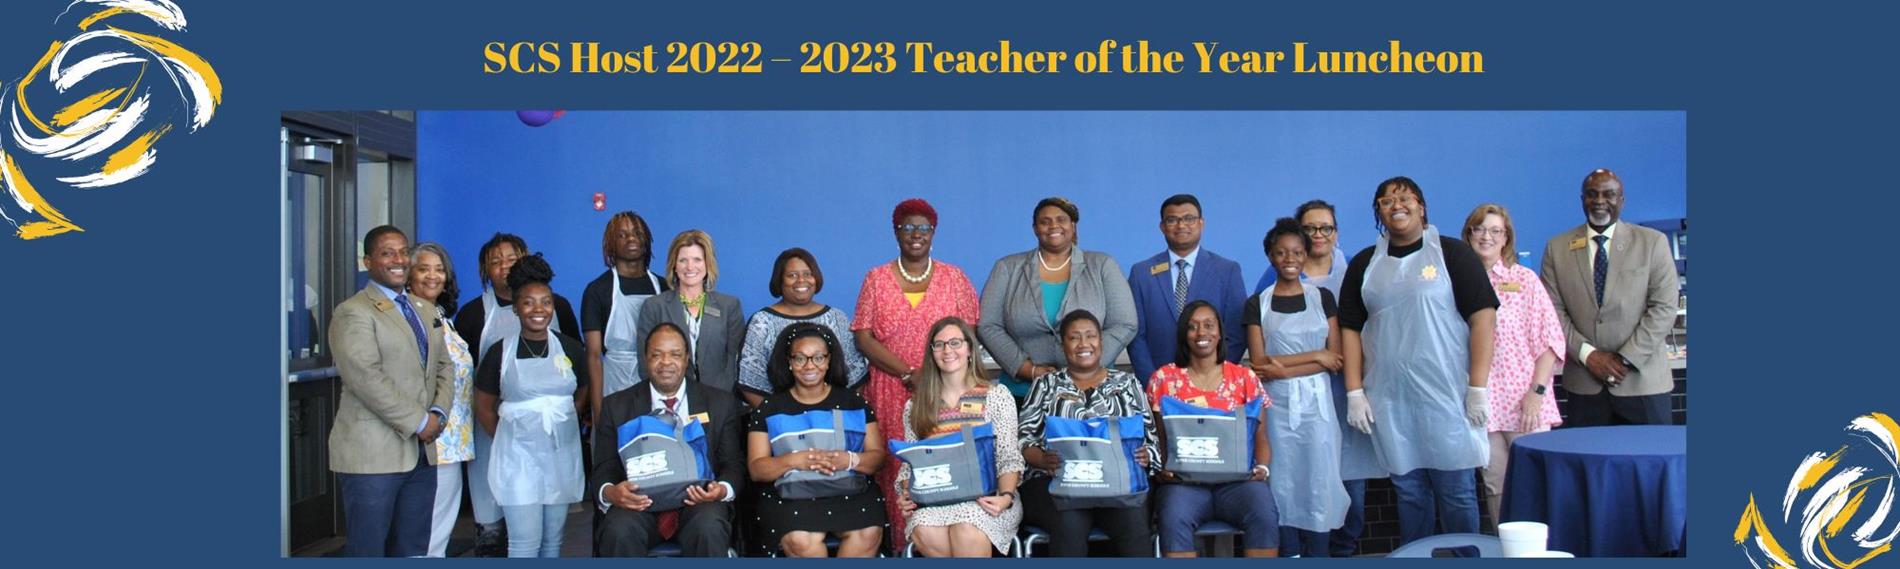 2022 – 2023 Teacher of the Year Luncheon Group Photo